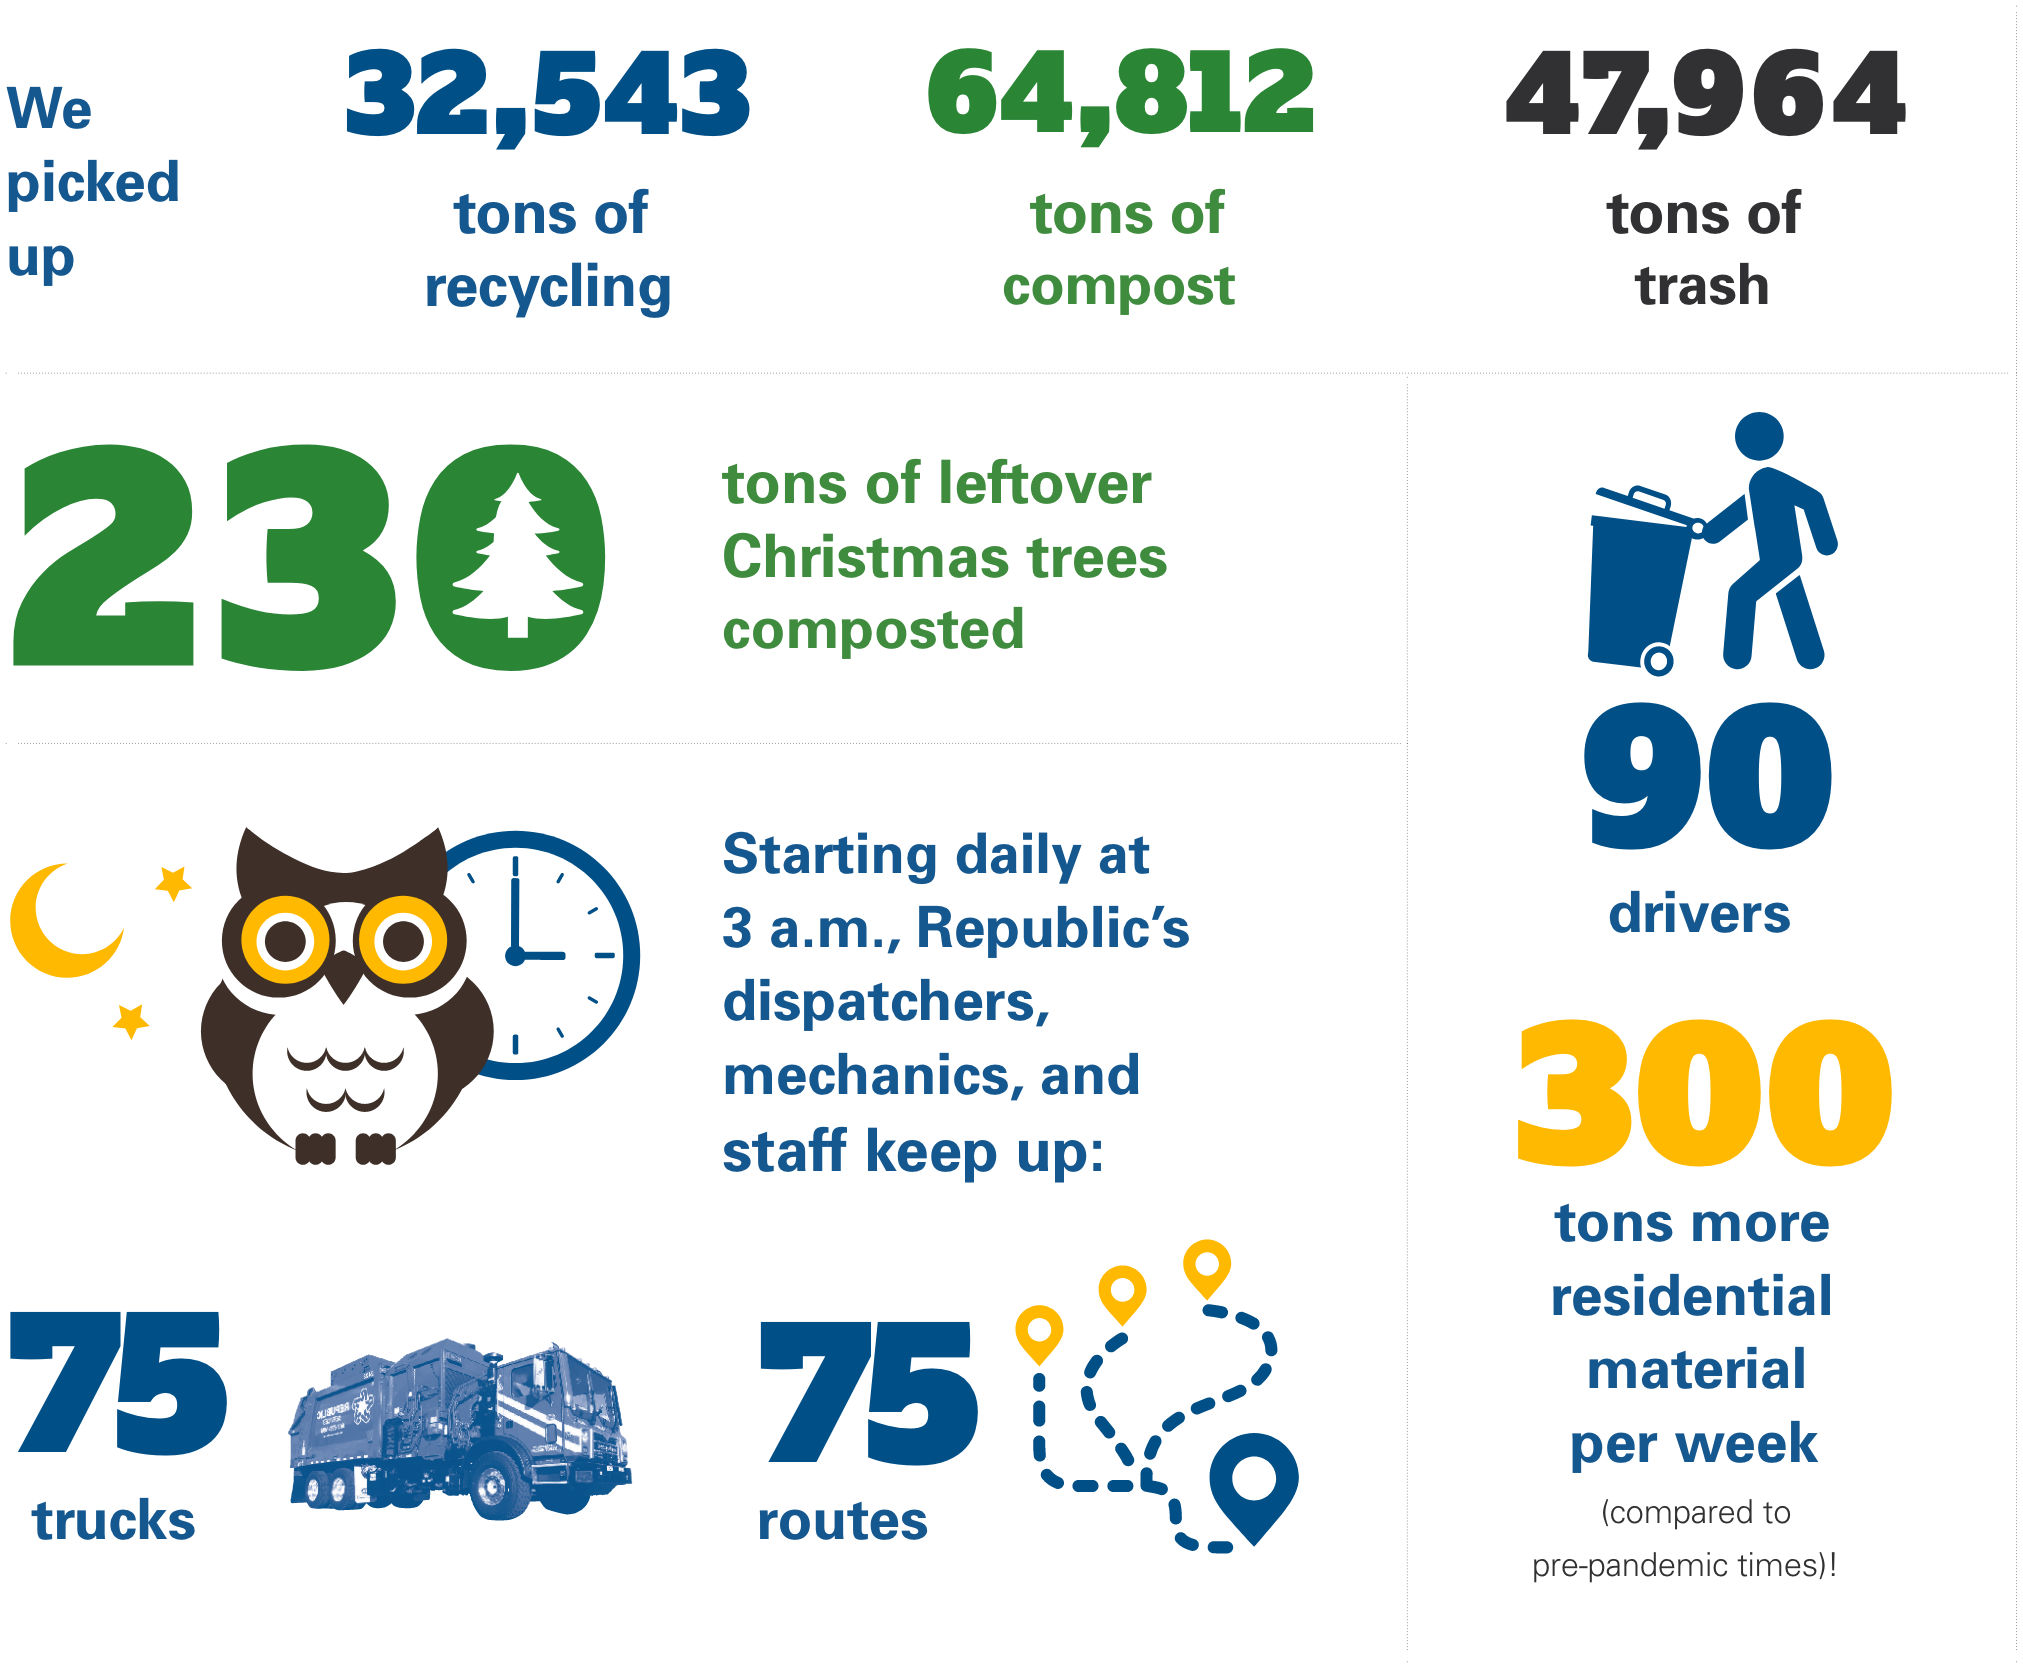 recyclling statistics - contact us for more information